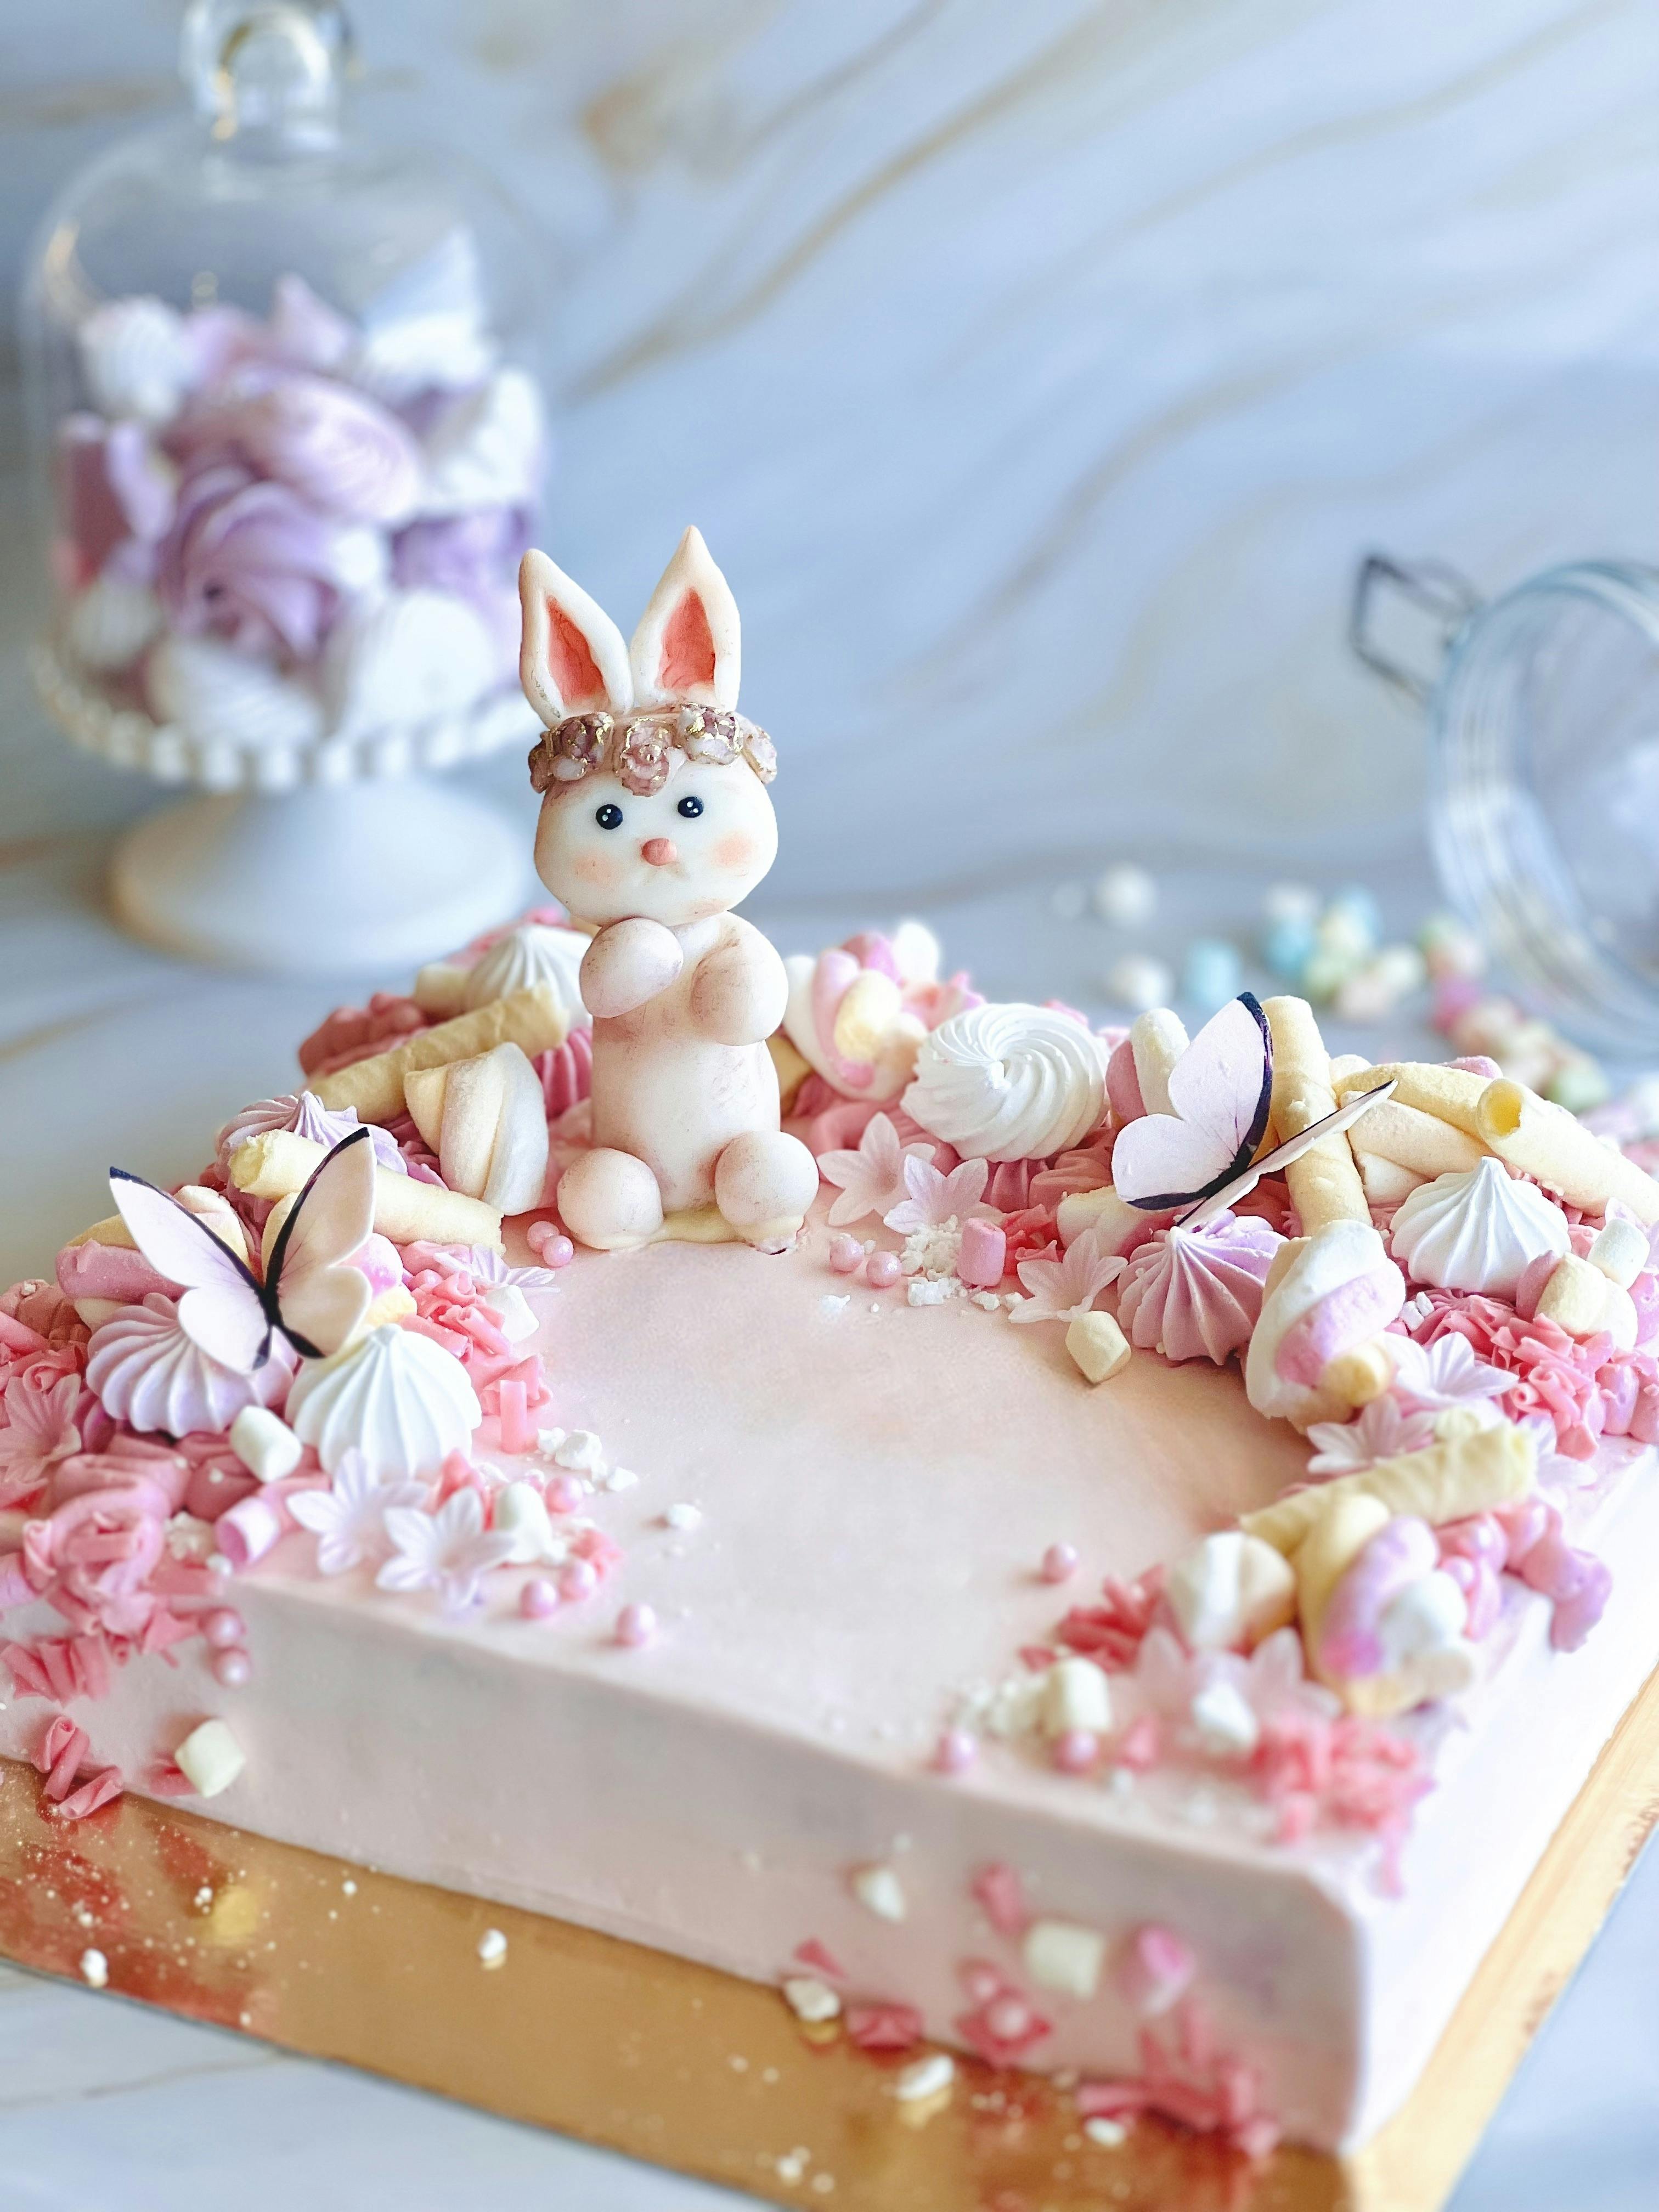 Easter Bunny Cake - The Cupcake Queens